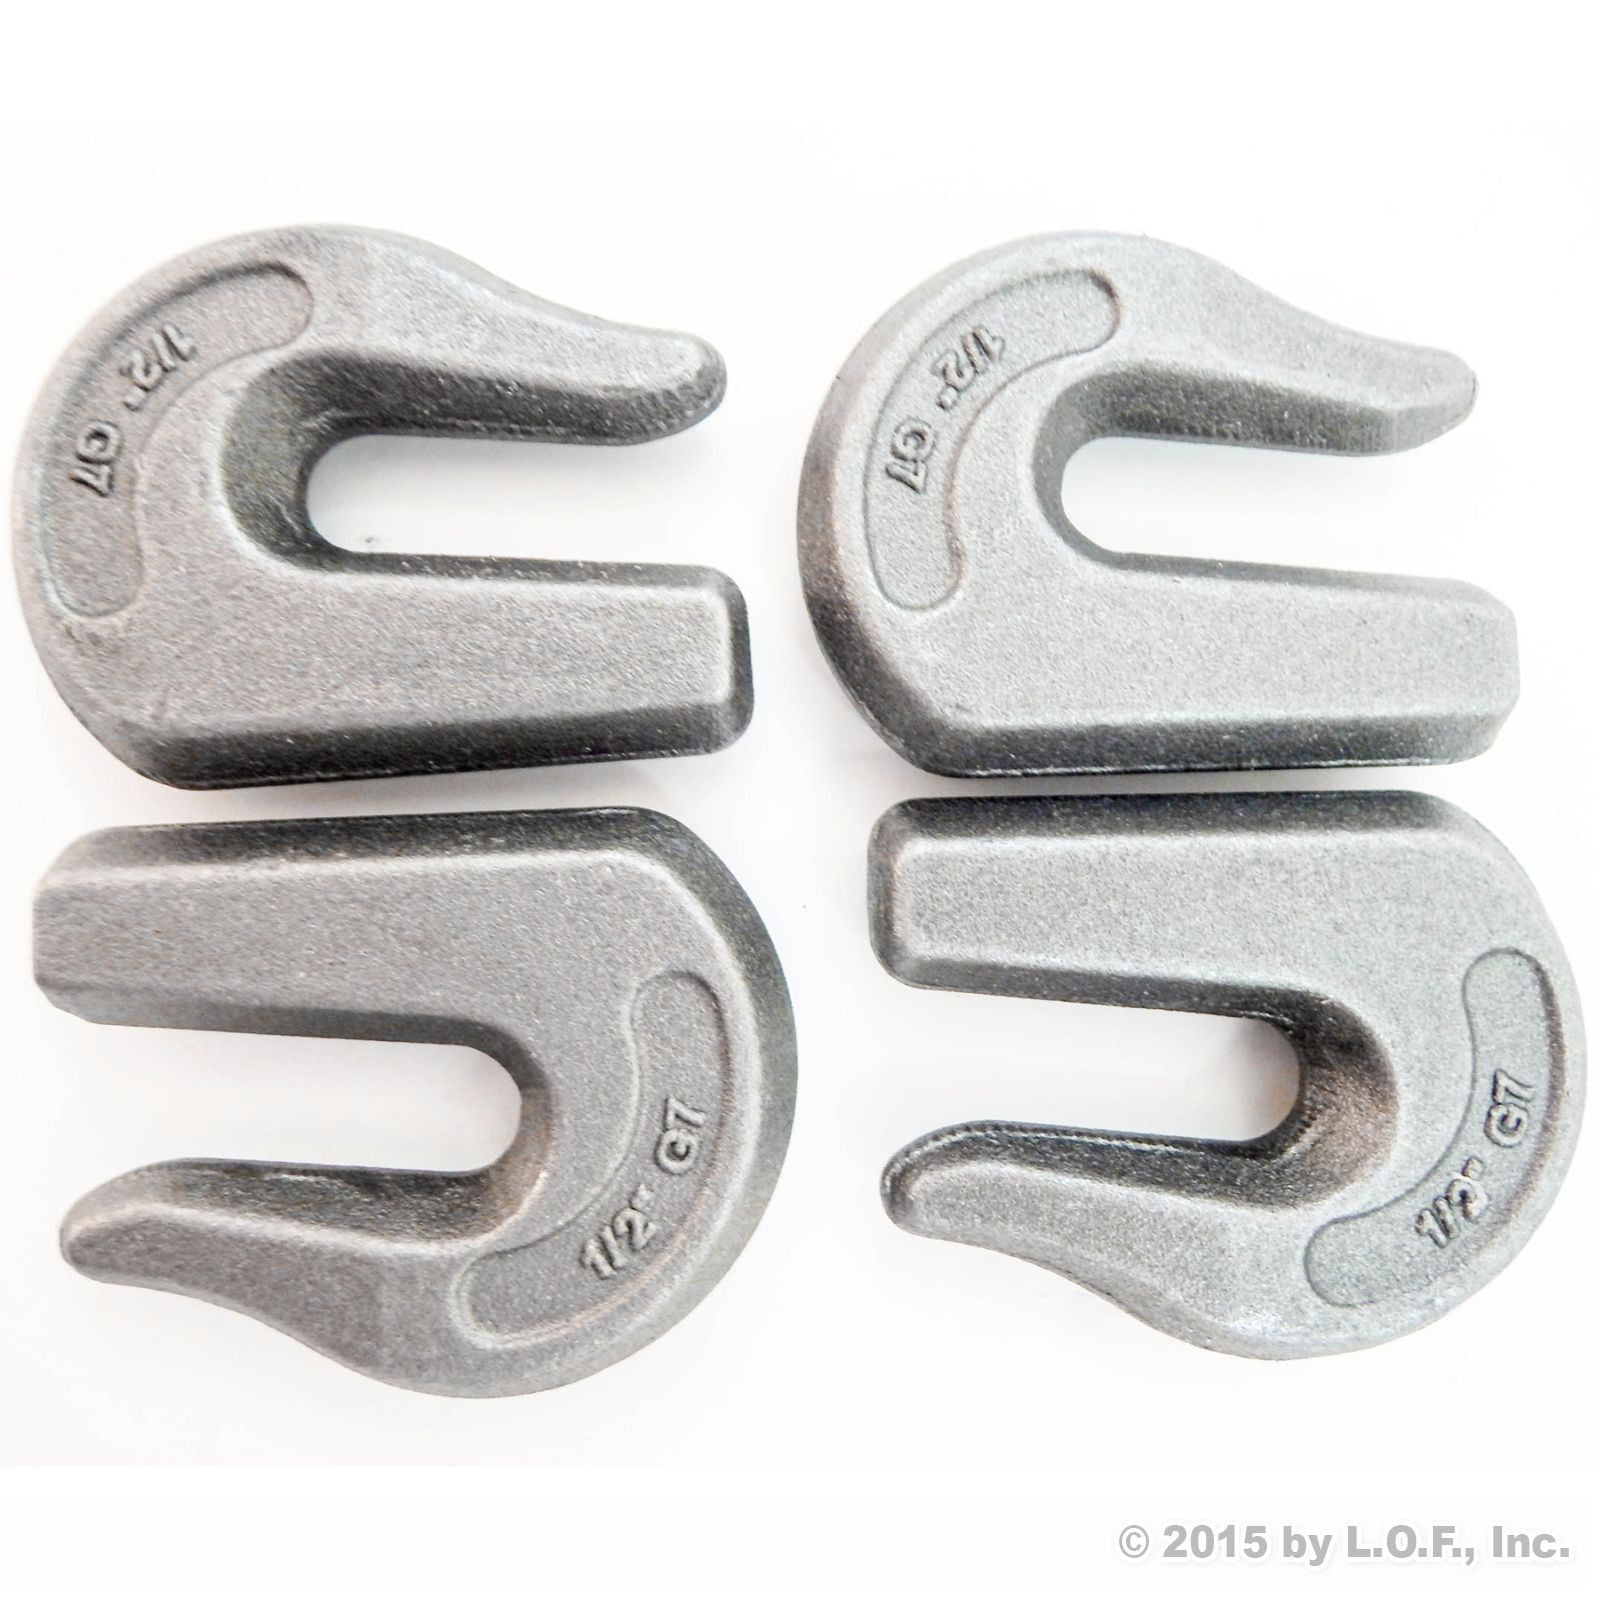 18.5 Grade 70 Chain Extension with Forged Grab Hook (4-pack)